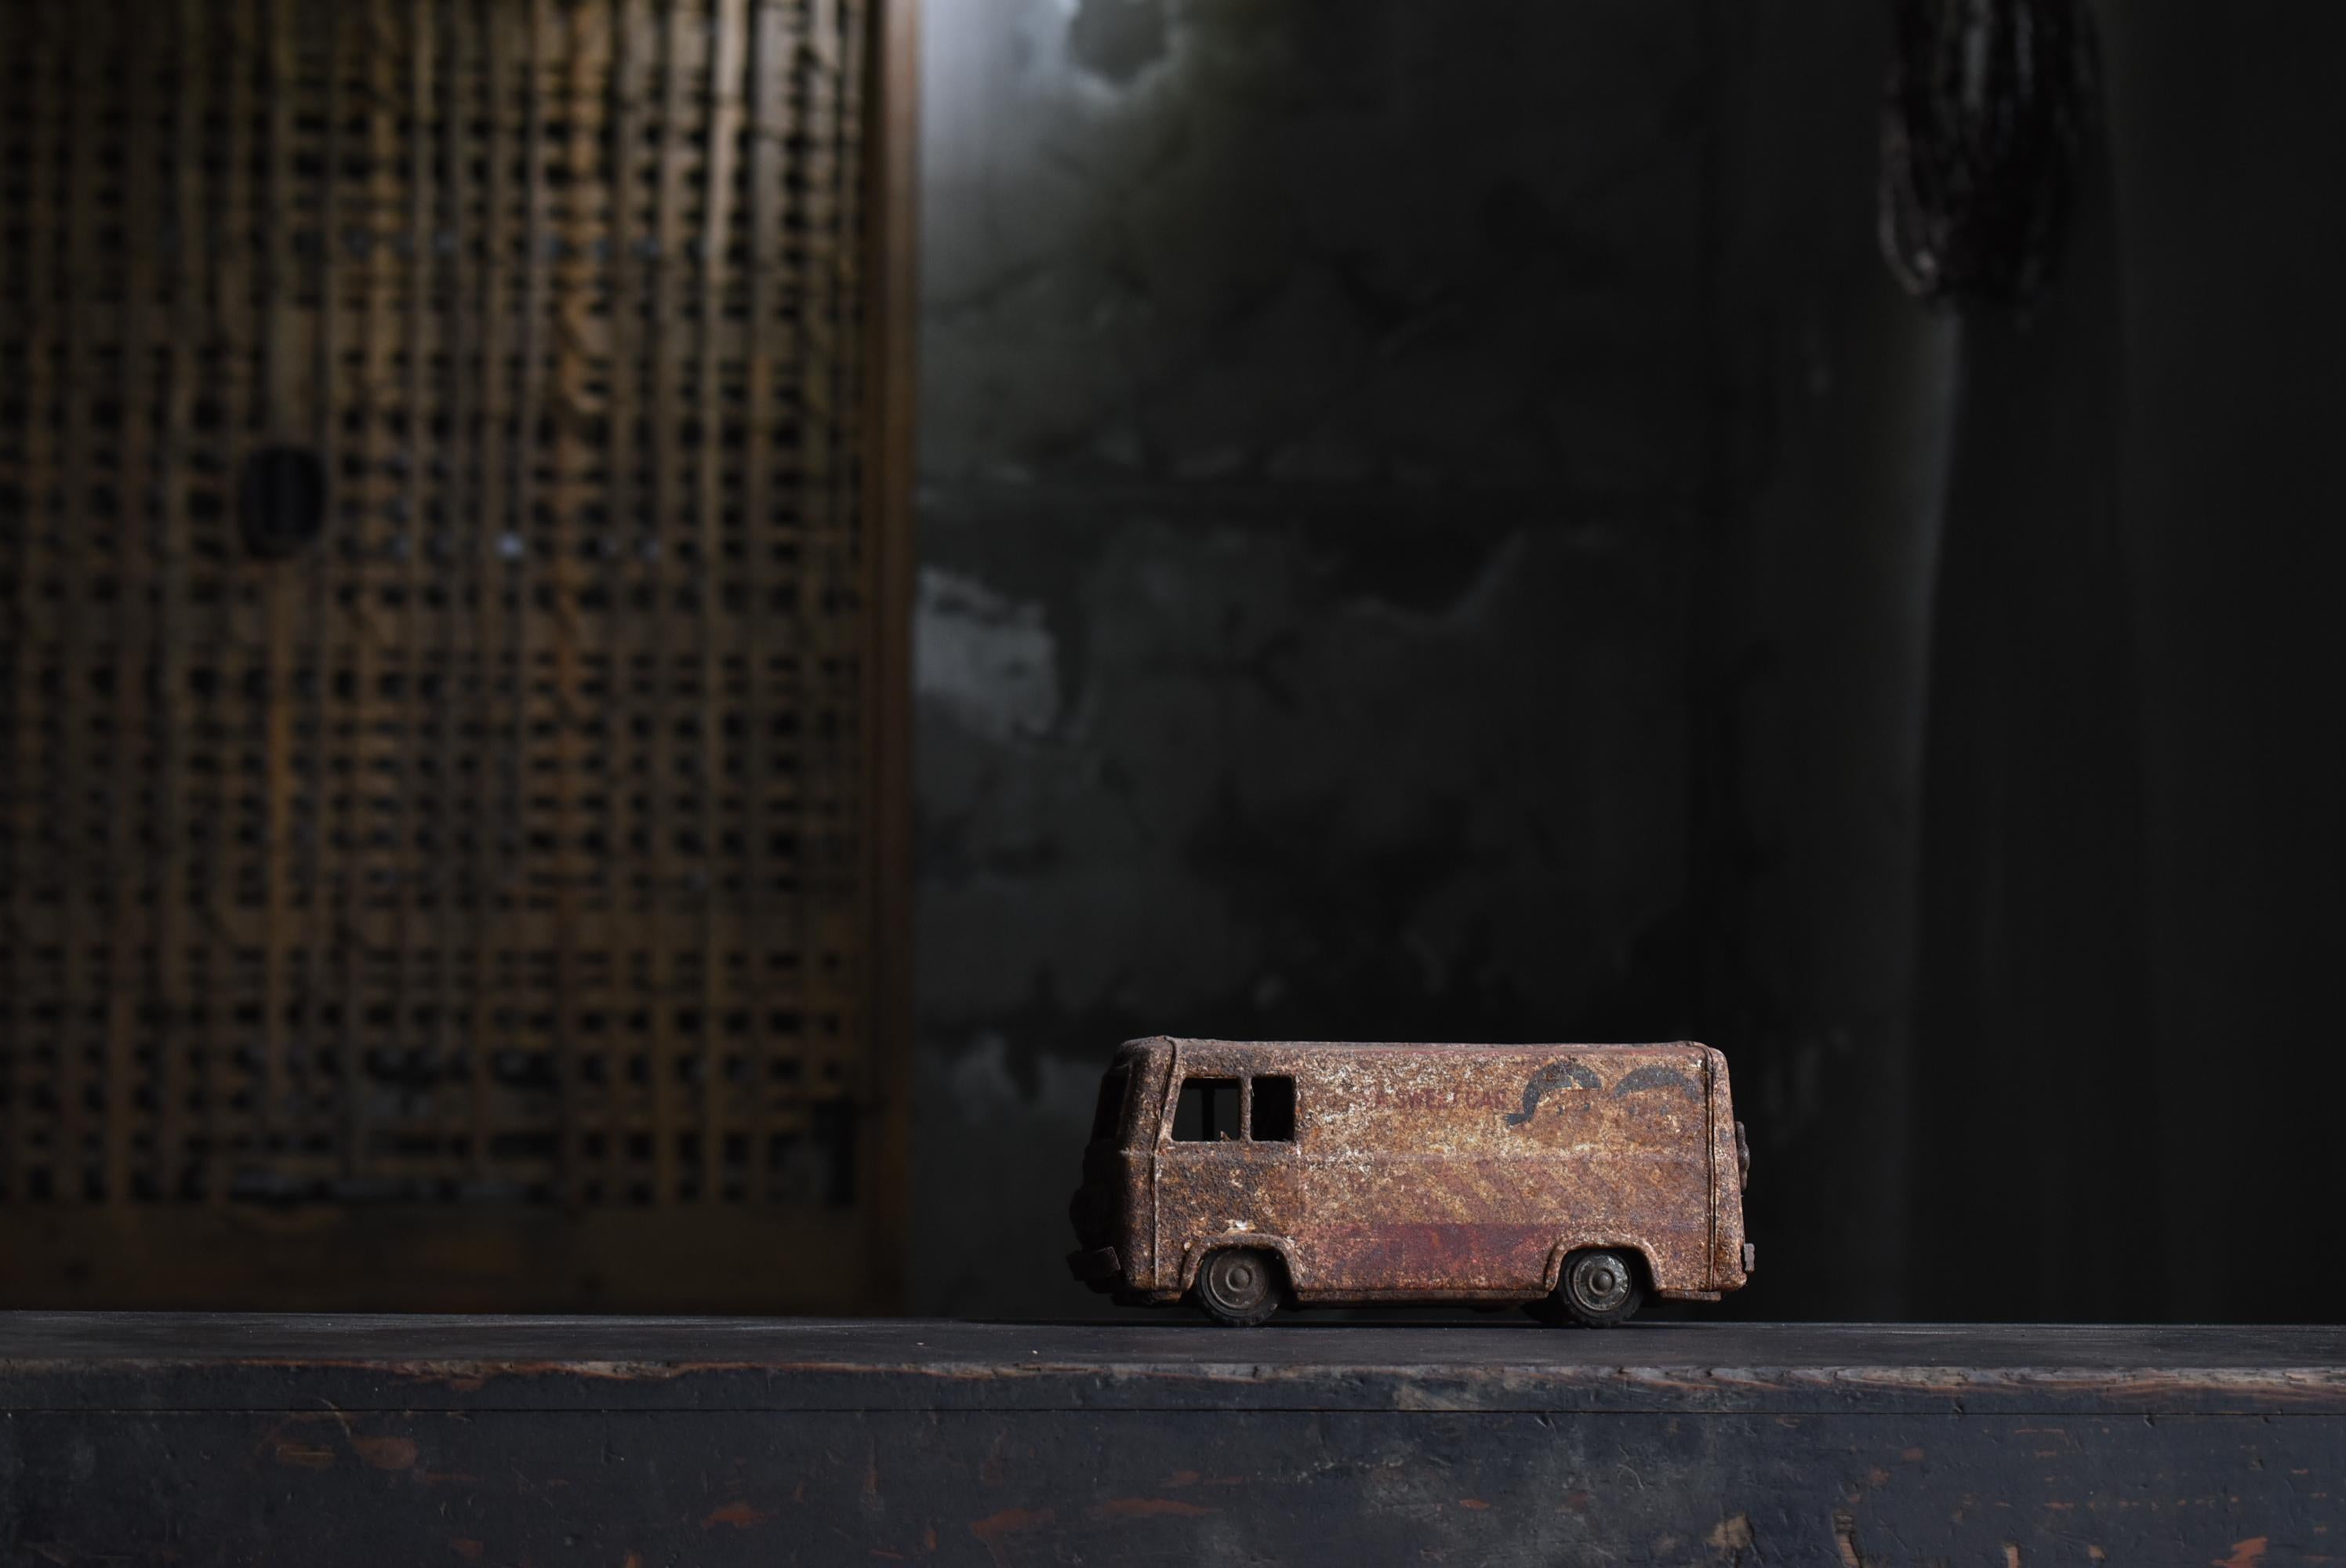 This is an old car toy made in Japan.
It is from the late Showa period. (1950s-1980s)
Mainly made of iron.

It has rusted over time.
The rust gives it a nice taste and creates an indescribable atmosphere.

I must say that it is a miracle that it has